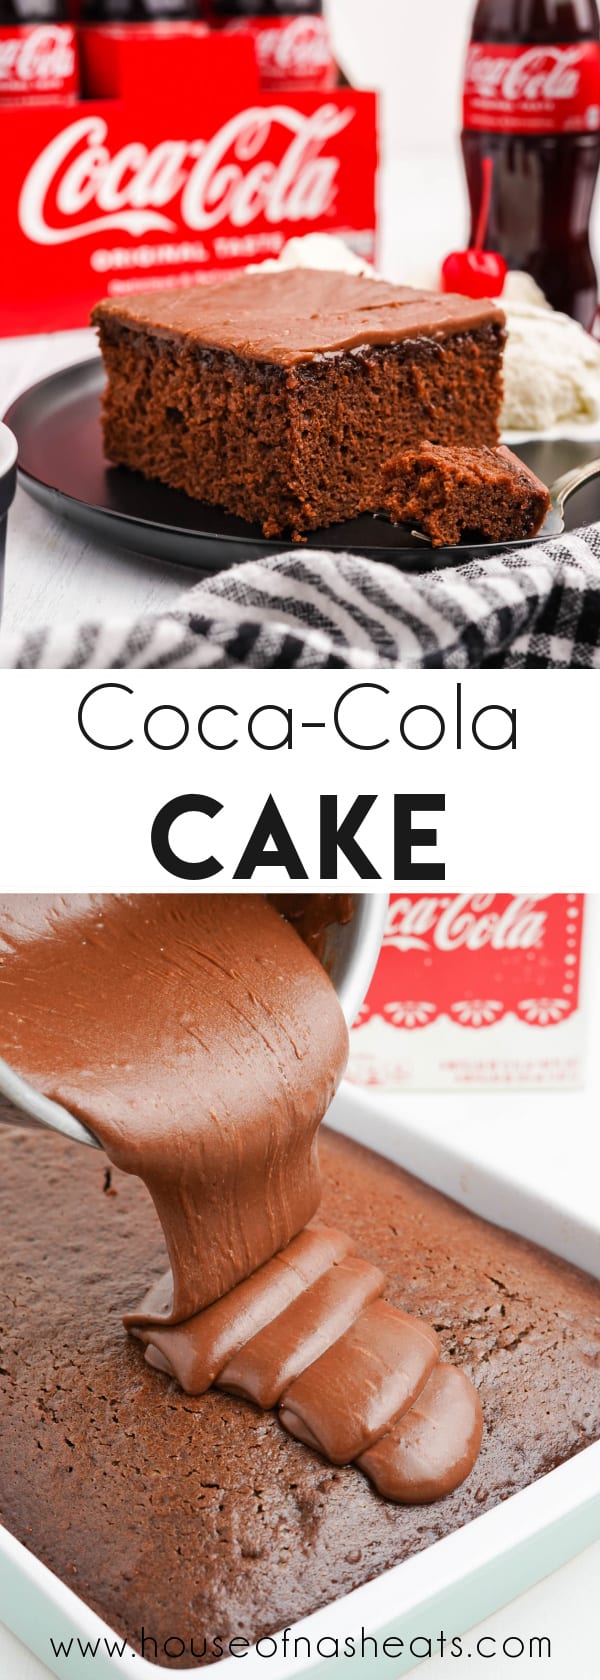 A collage of images of coca-cola cake with text overlay.